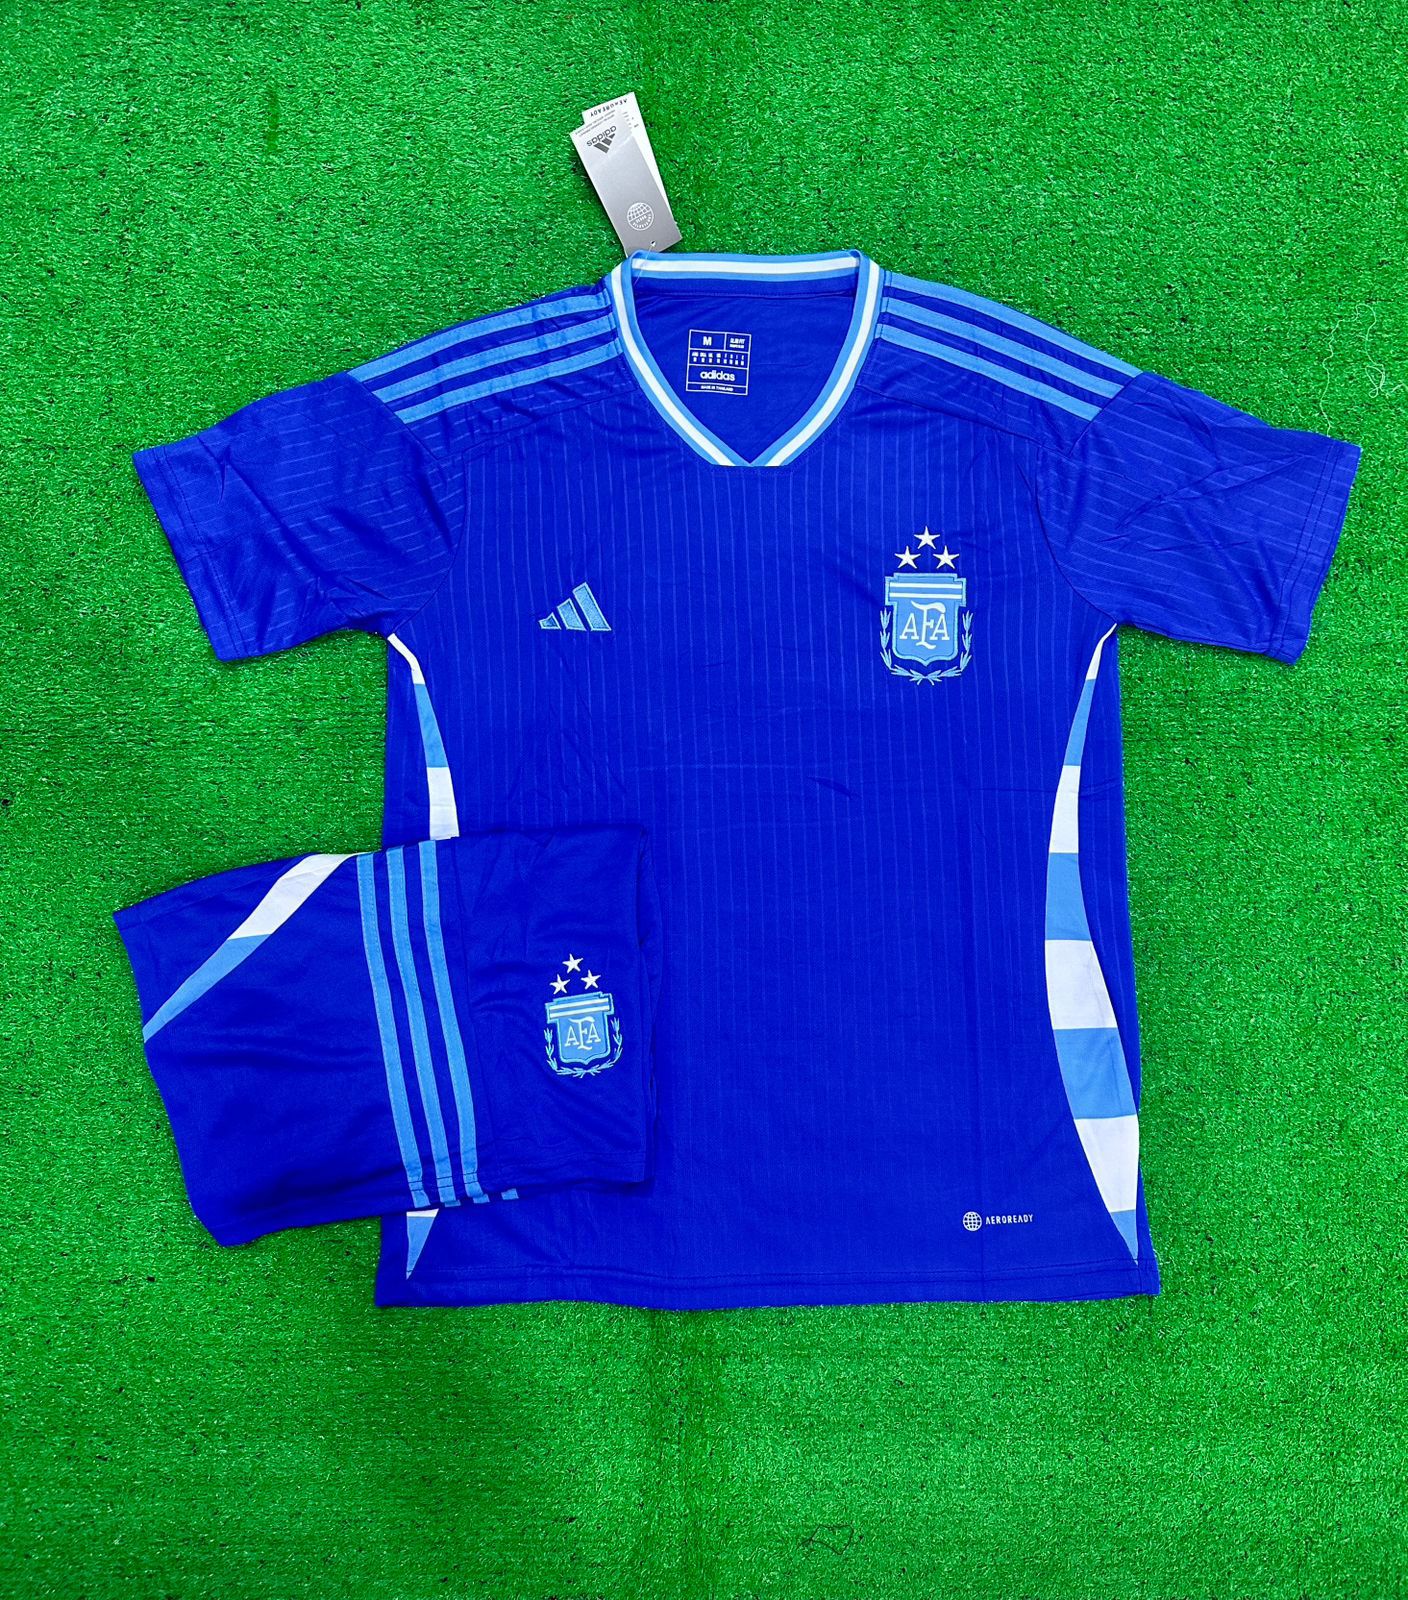 ARGENTINA AWAY JERSEY WITH SHORTS